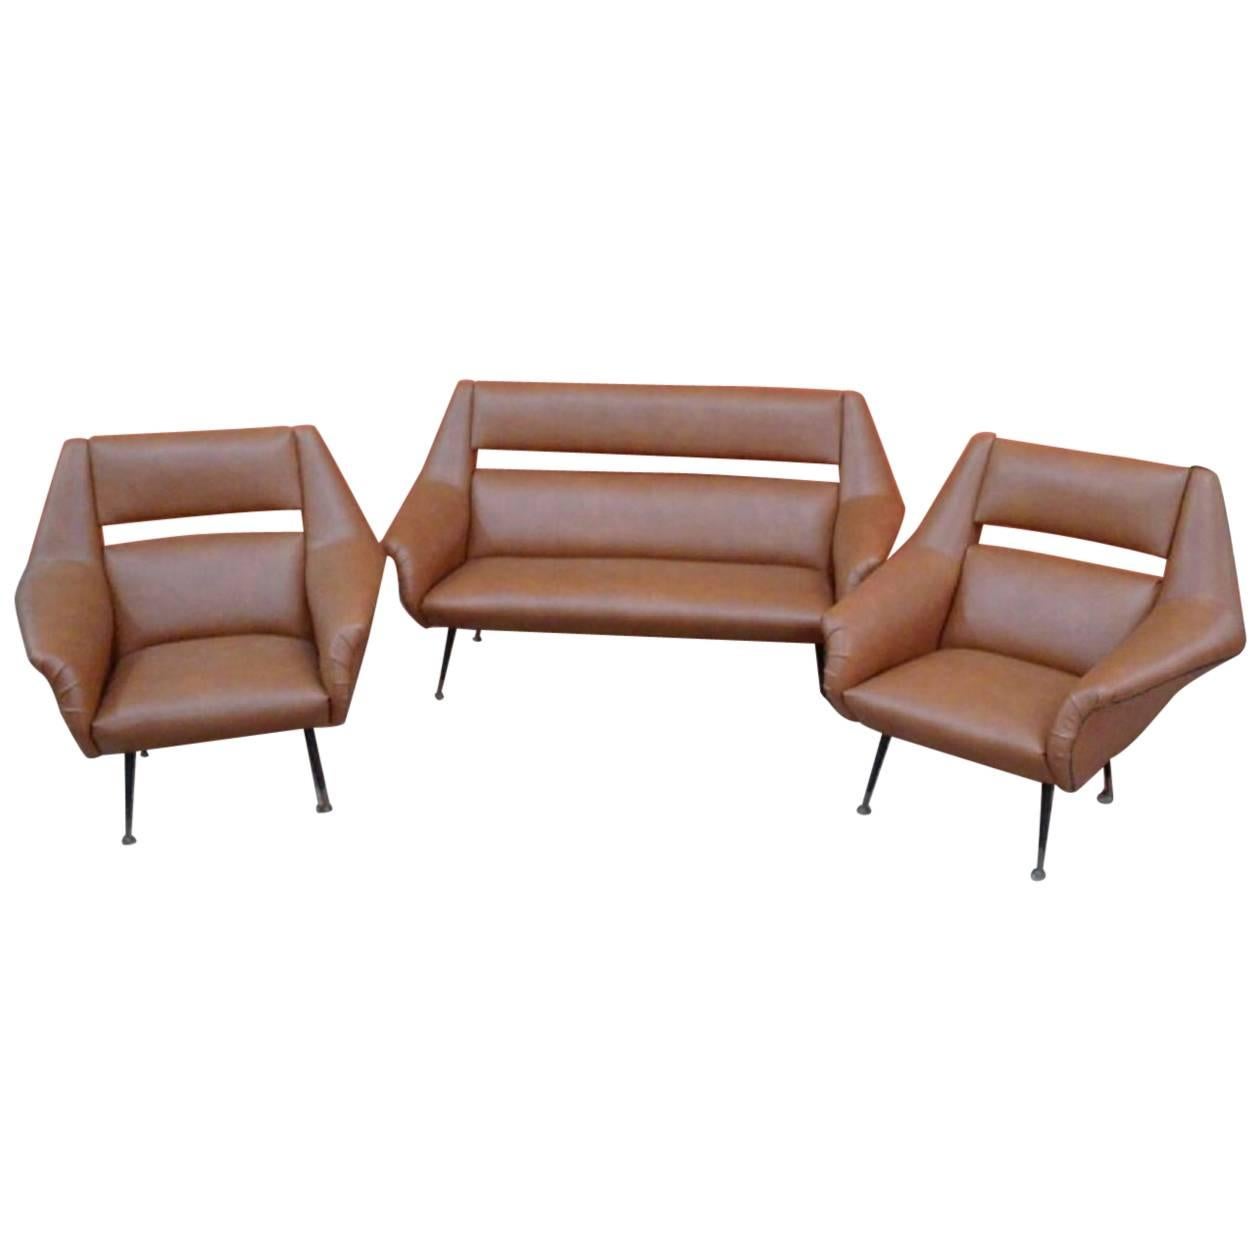 Sofa and Pair of Armchairs in Brown Leather and Italian Brass Legs by Gio Ponti